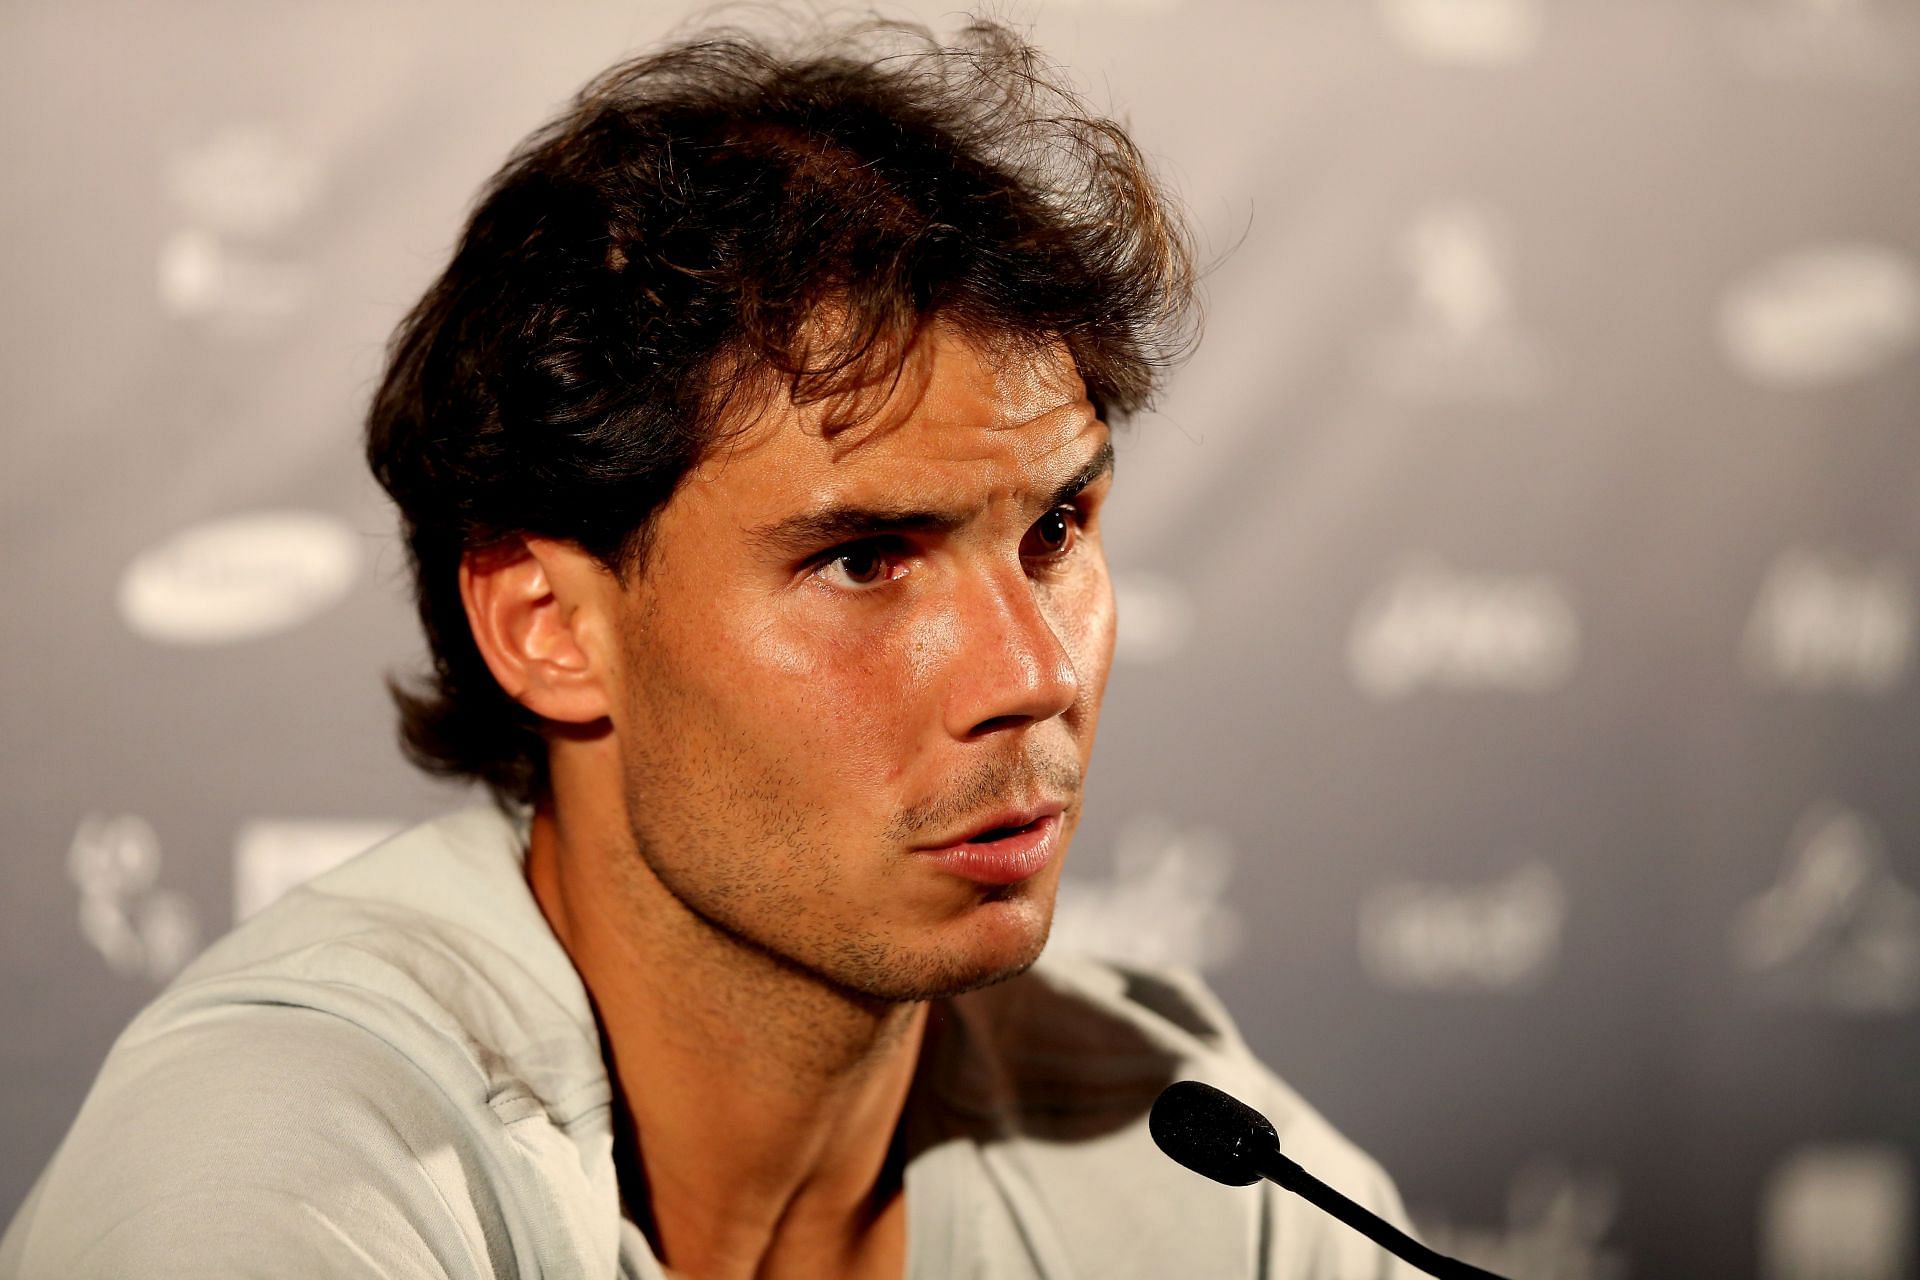 Rafael Nadal said he understands the decisions of both, Wimbledon and the ATP